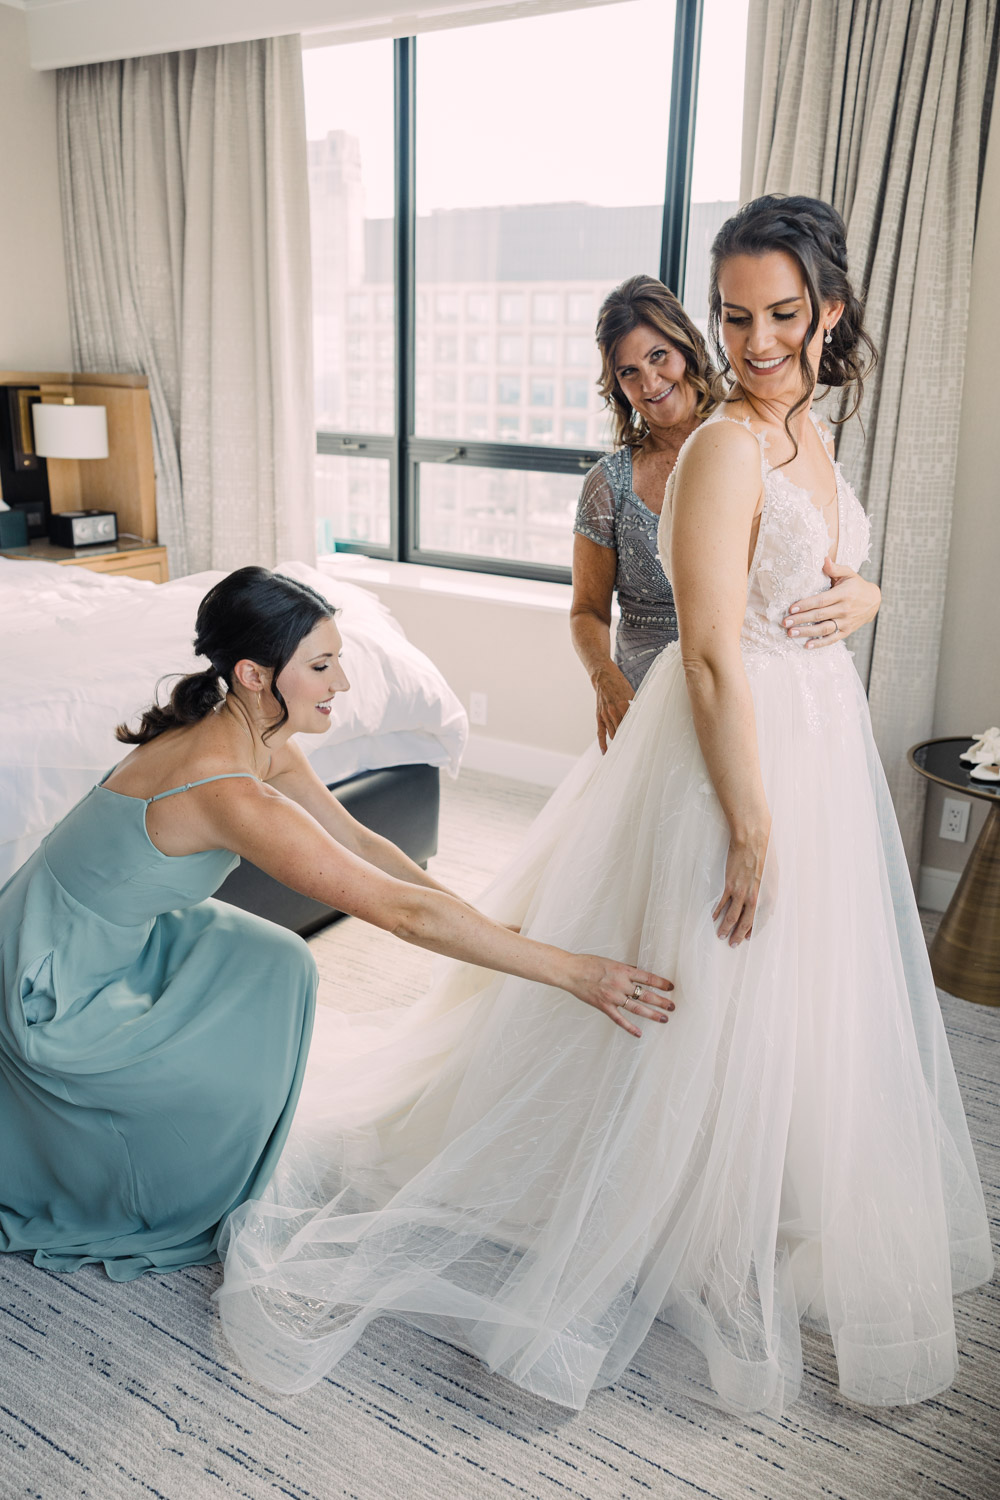 Bride getting ready photo at the Ritz Carlton Hotel in Chicago